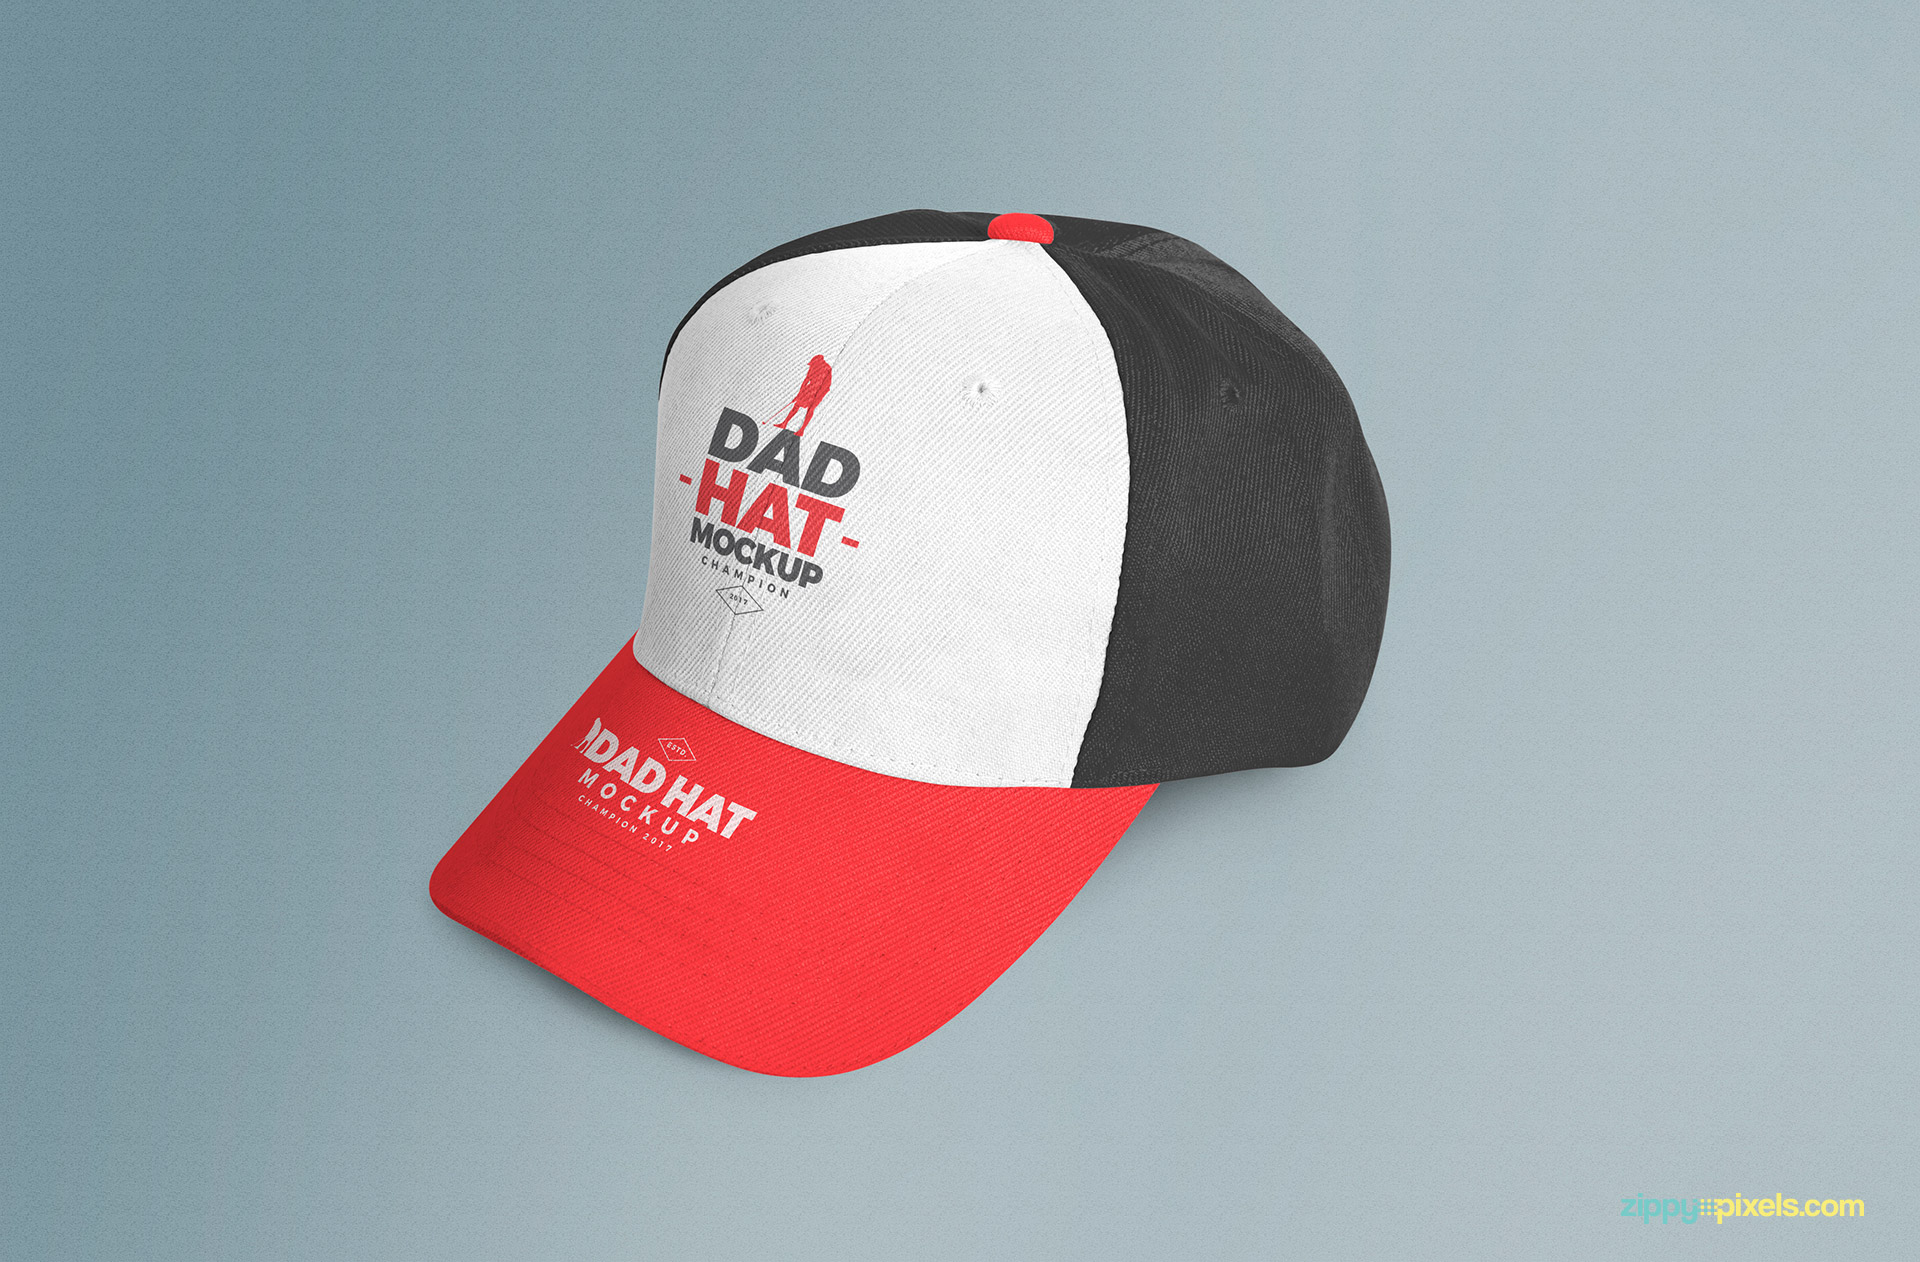 Download Get Cycling Cap Mockup Psd Images Yellowimages - Free PSD ...